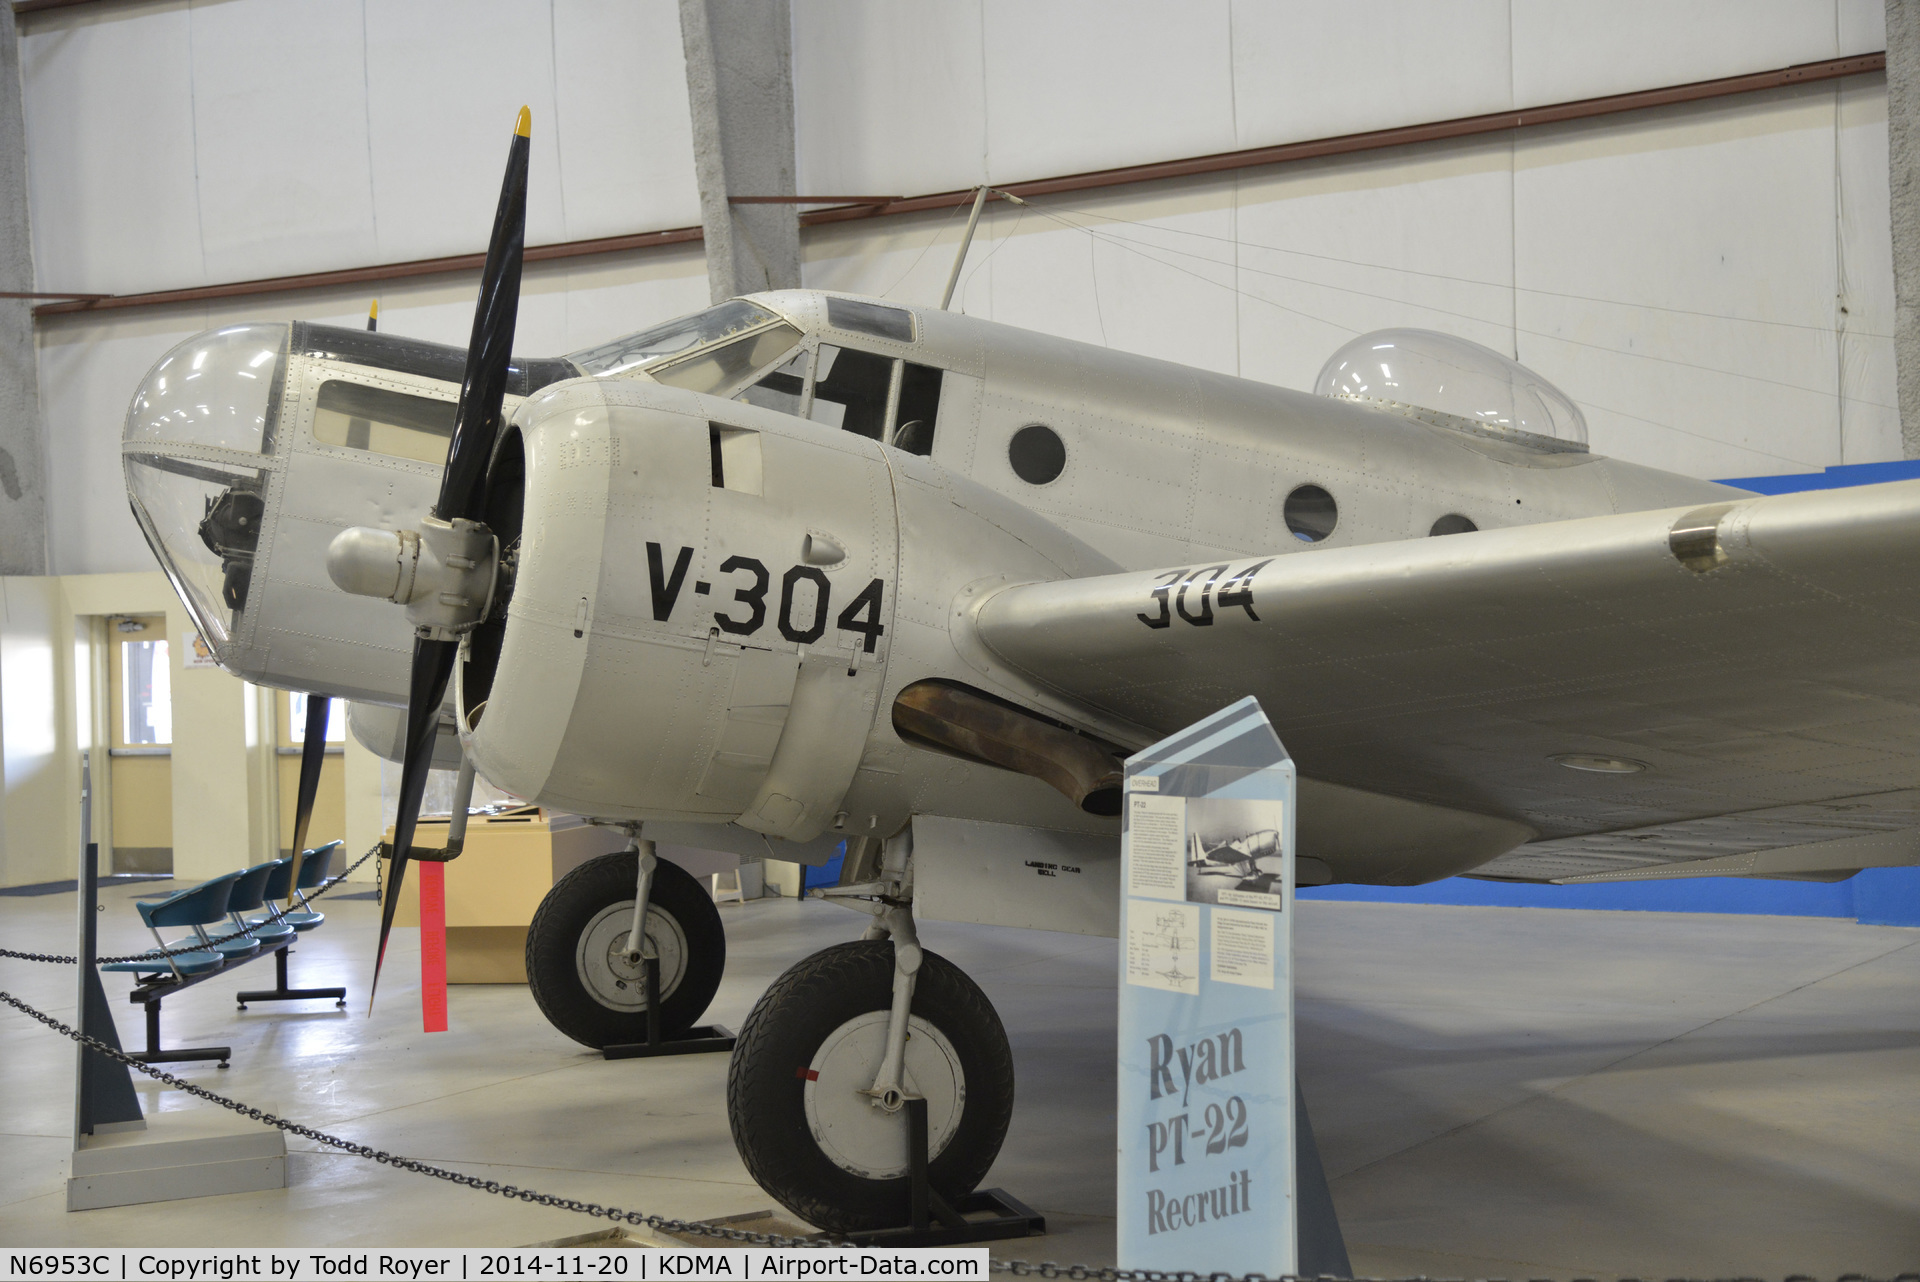 N6953C, Beech AT-11 Kansan C/N 1003, On Display at the Pima Air and Space Museum